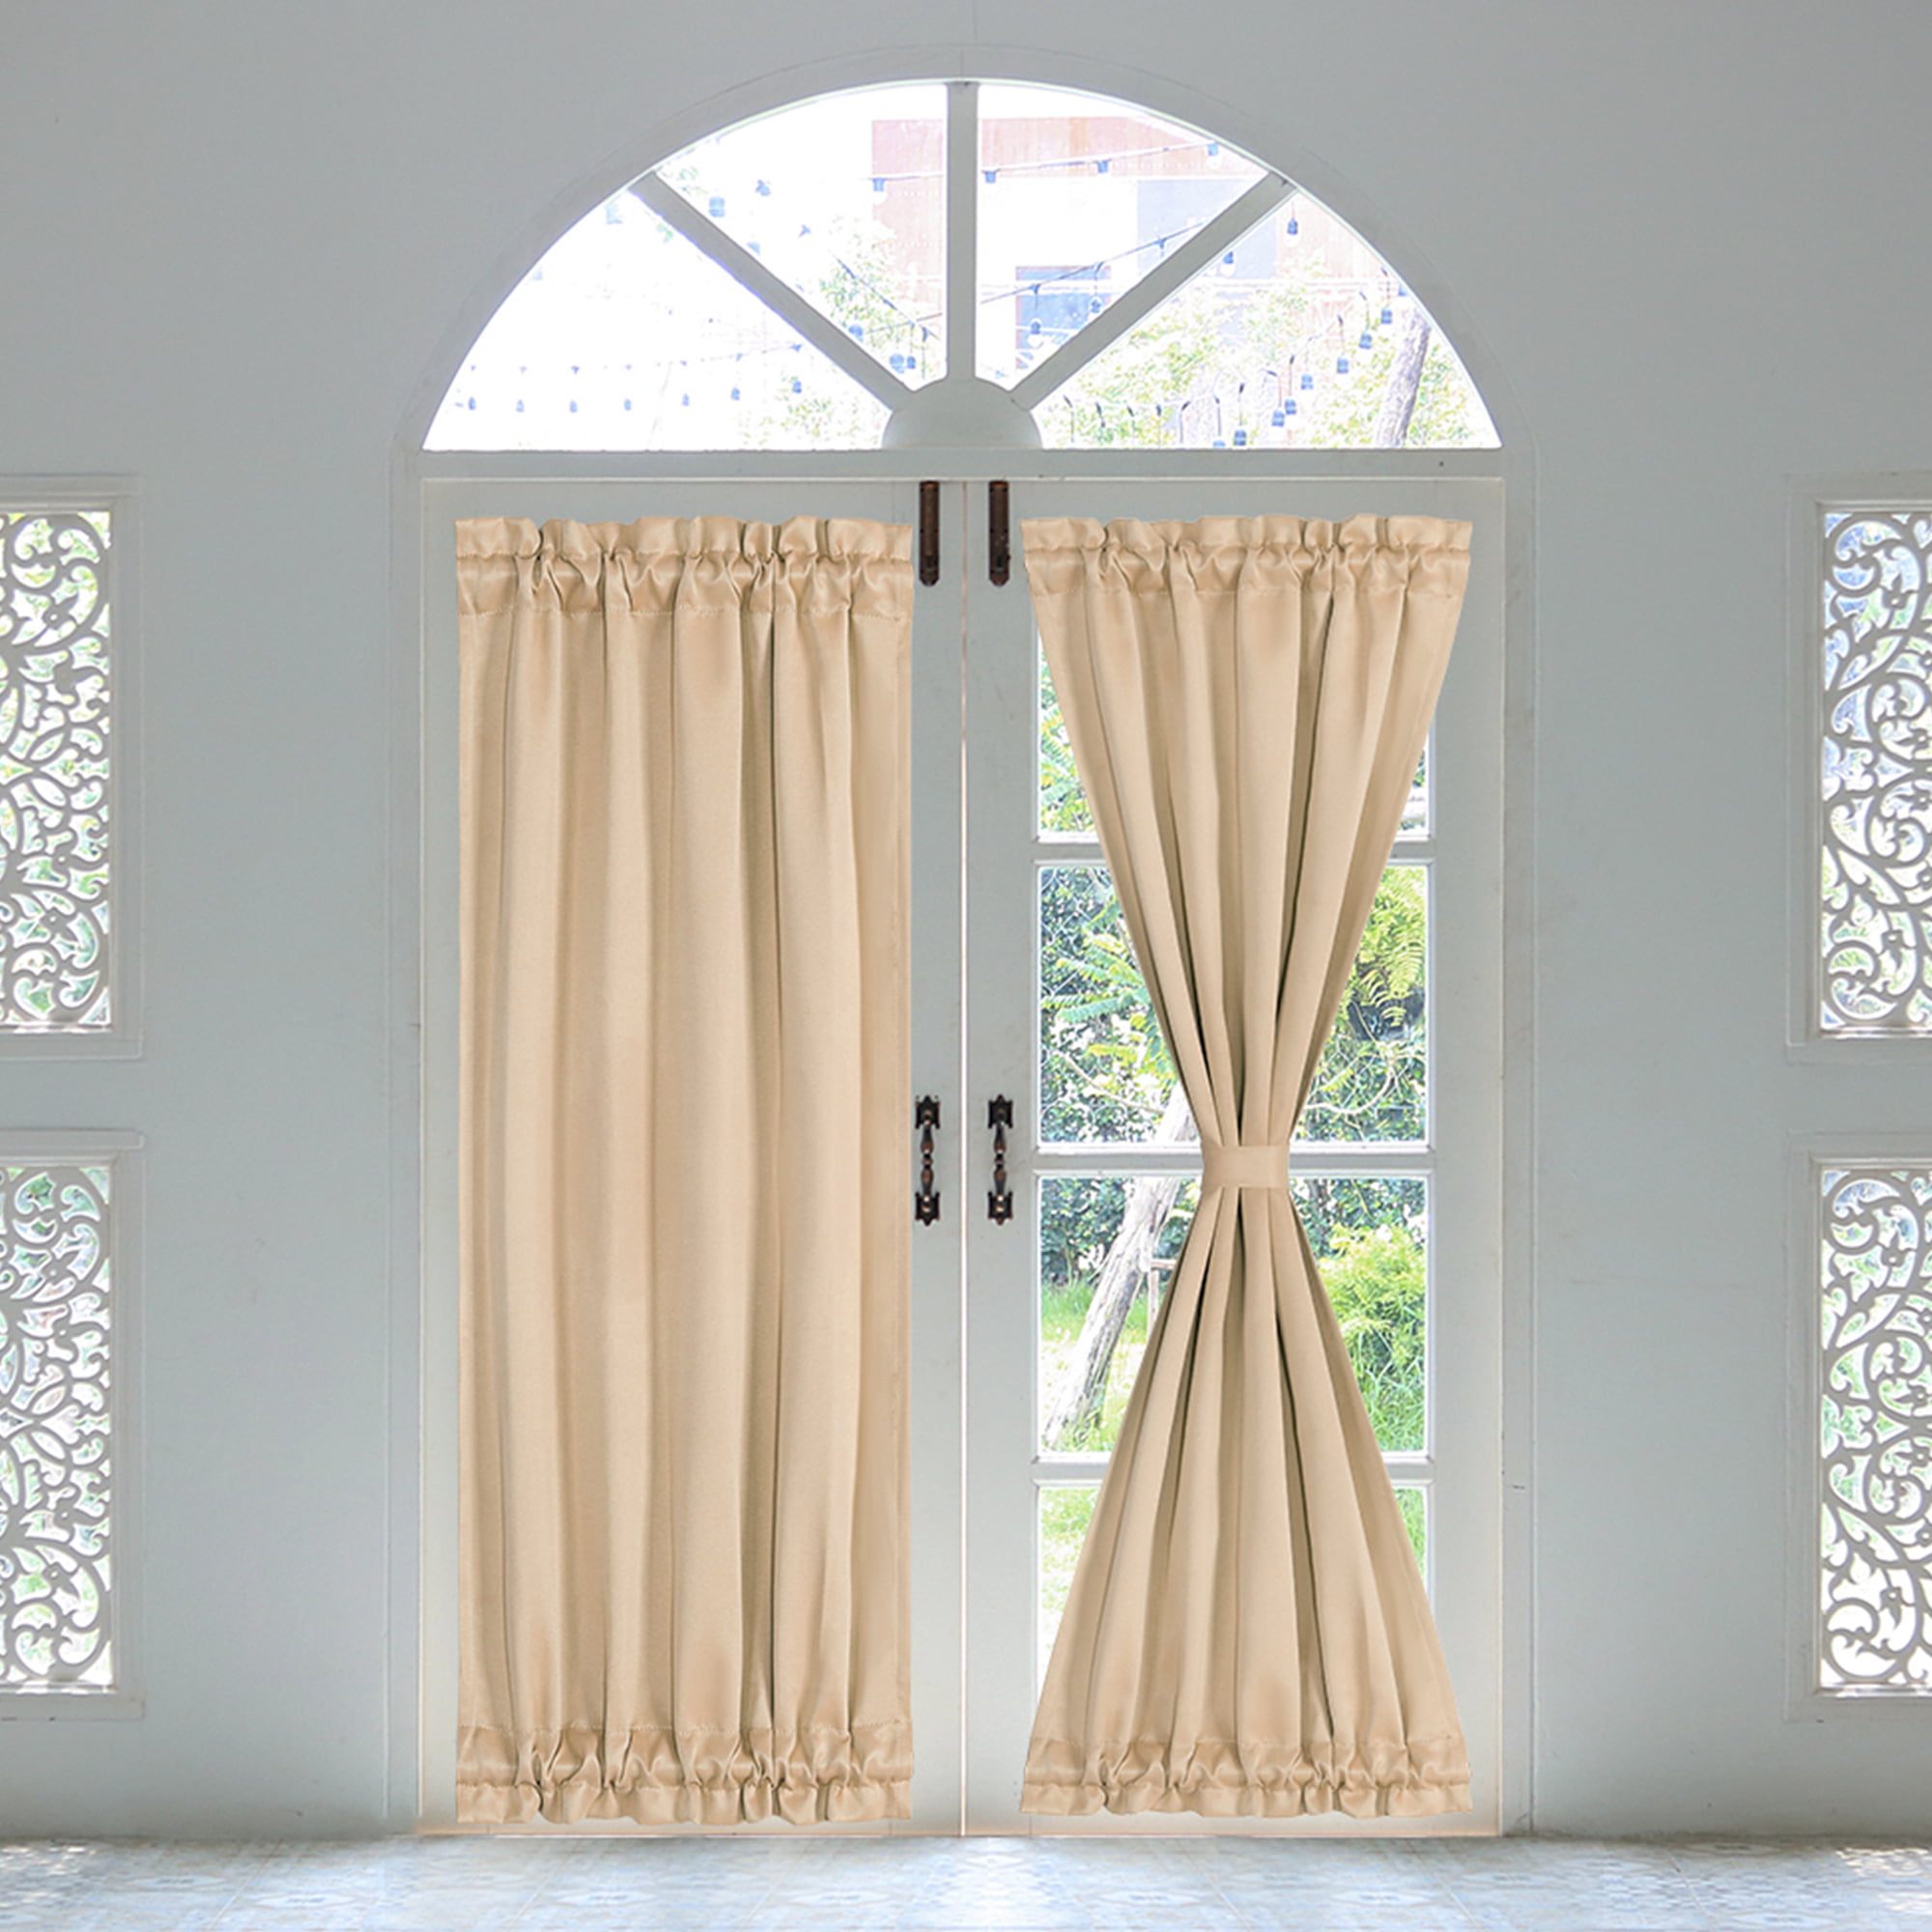 Piccocasa French Blackout Door Curtain Thermal Insulated 25x72 inch, Solid Khaki - Walmart.com